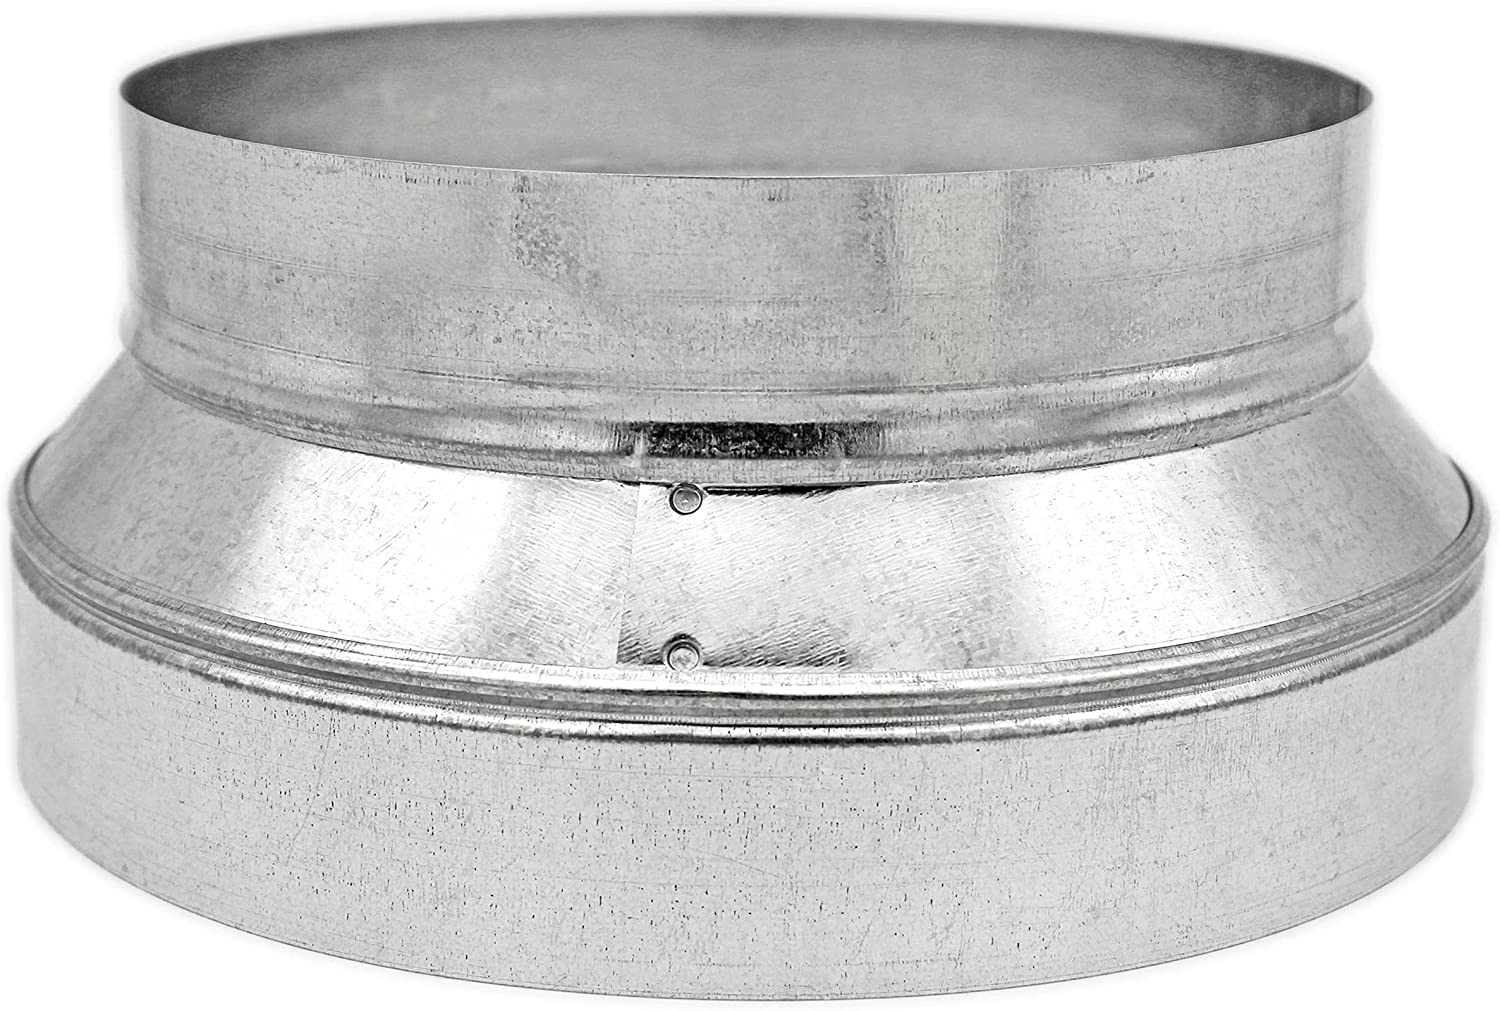 HVAC Premium Round Metal Pipe Reducer & Increaser | 16" to 14" HVAC Duct Reducer or Increaser 26g Gauge | Galvanized Sheet Metal Ducting Connector is Compatible with Duct 14"